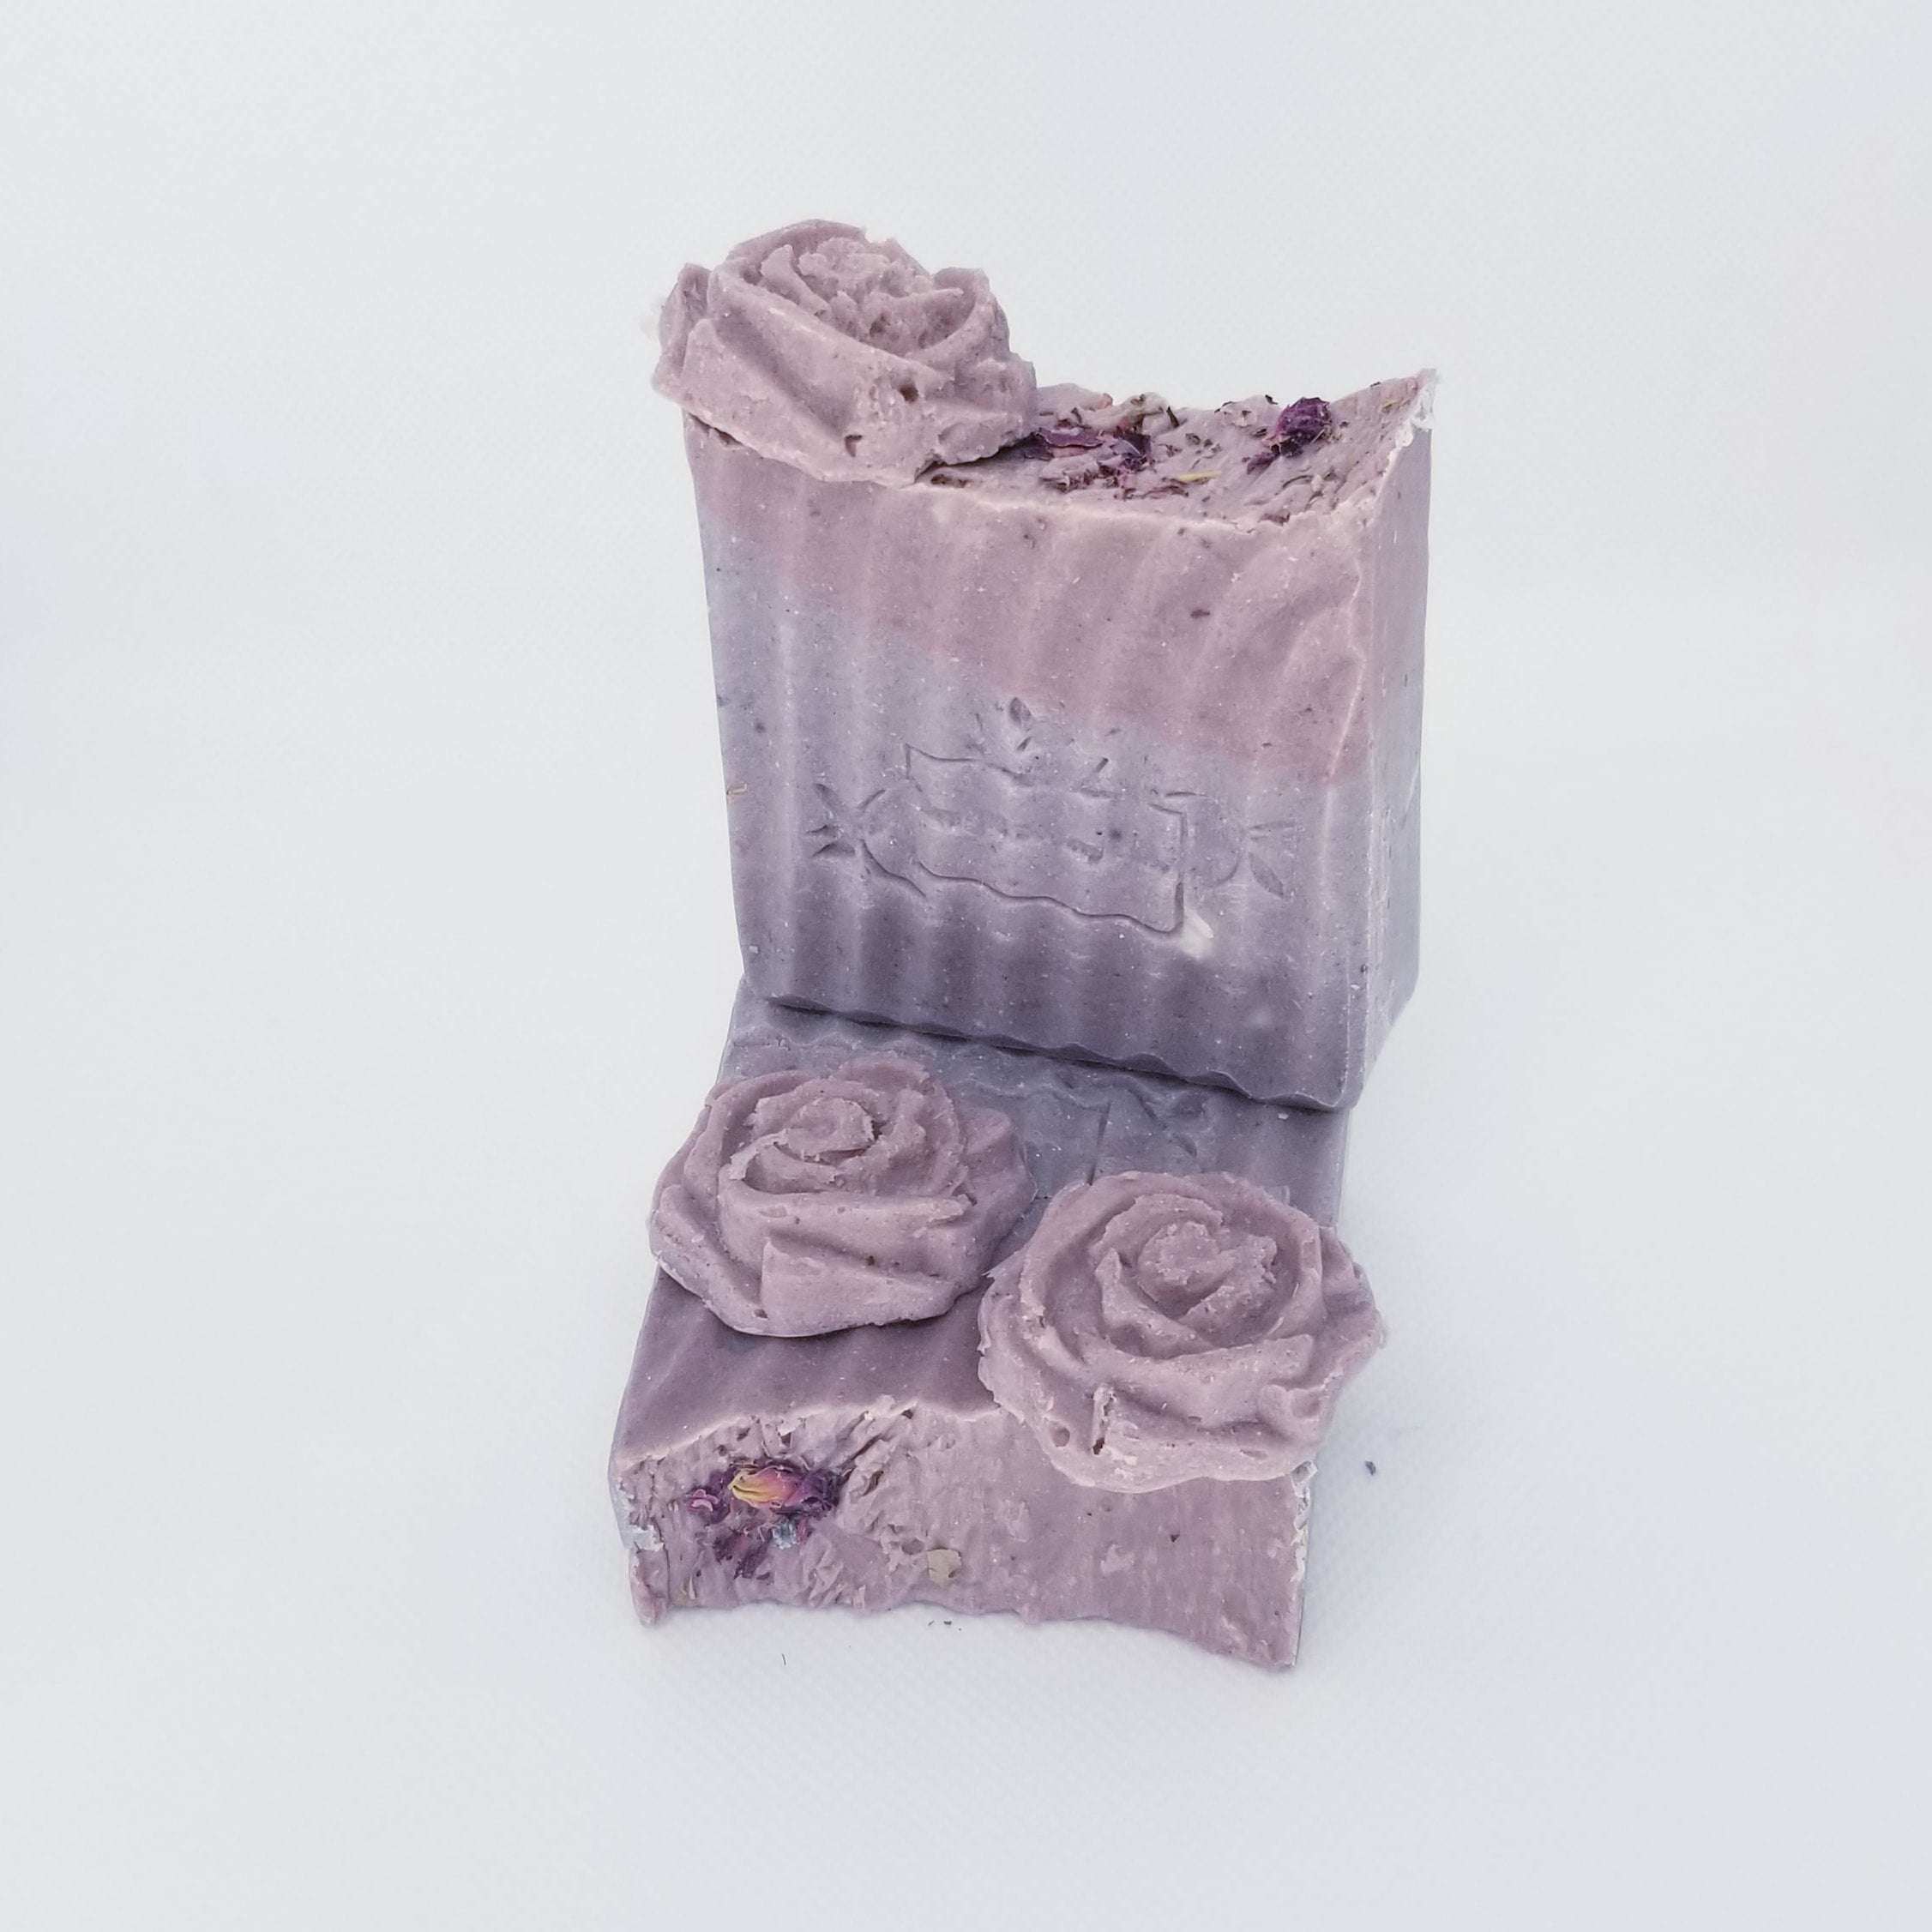 Rose and Activated Charcoal Soap